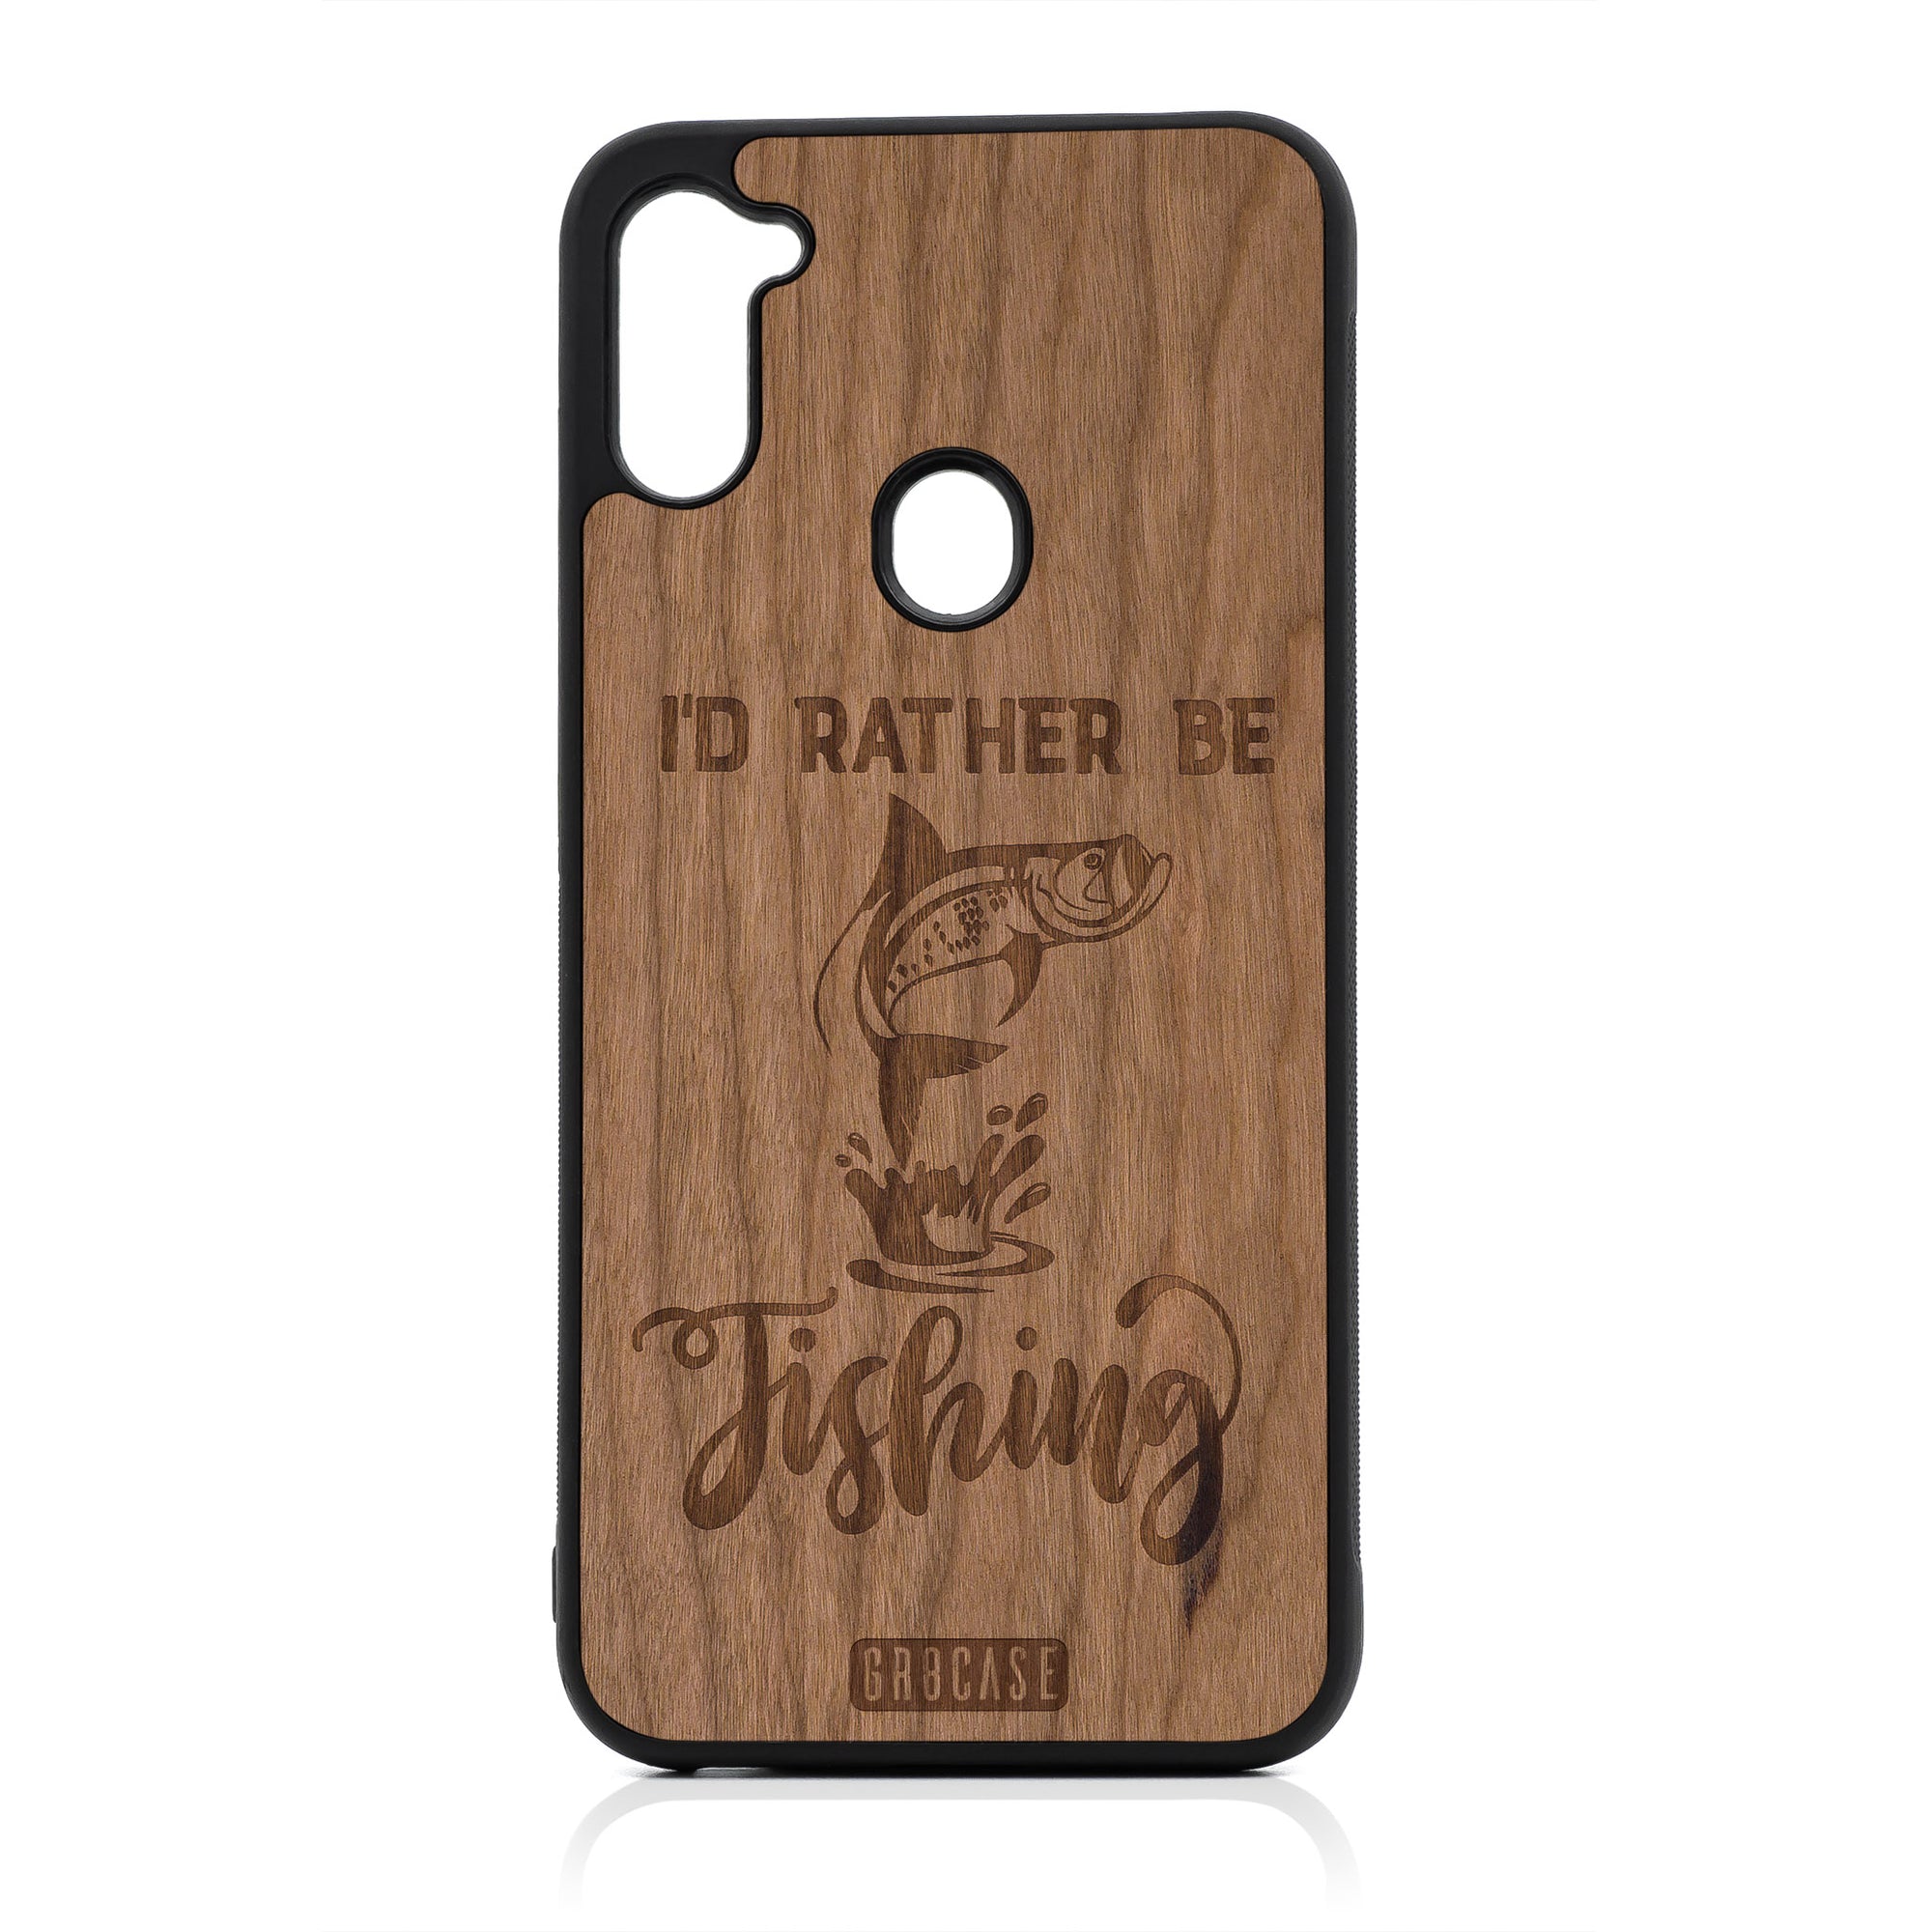 I'd Rather Be Fishing Design Wood Case For Samsung Galaxy A11